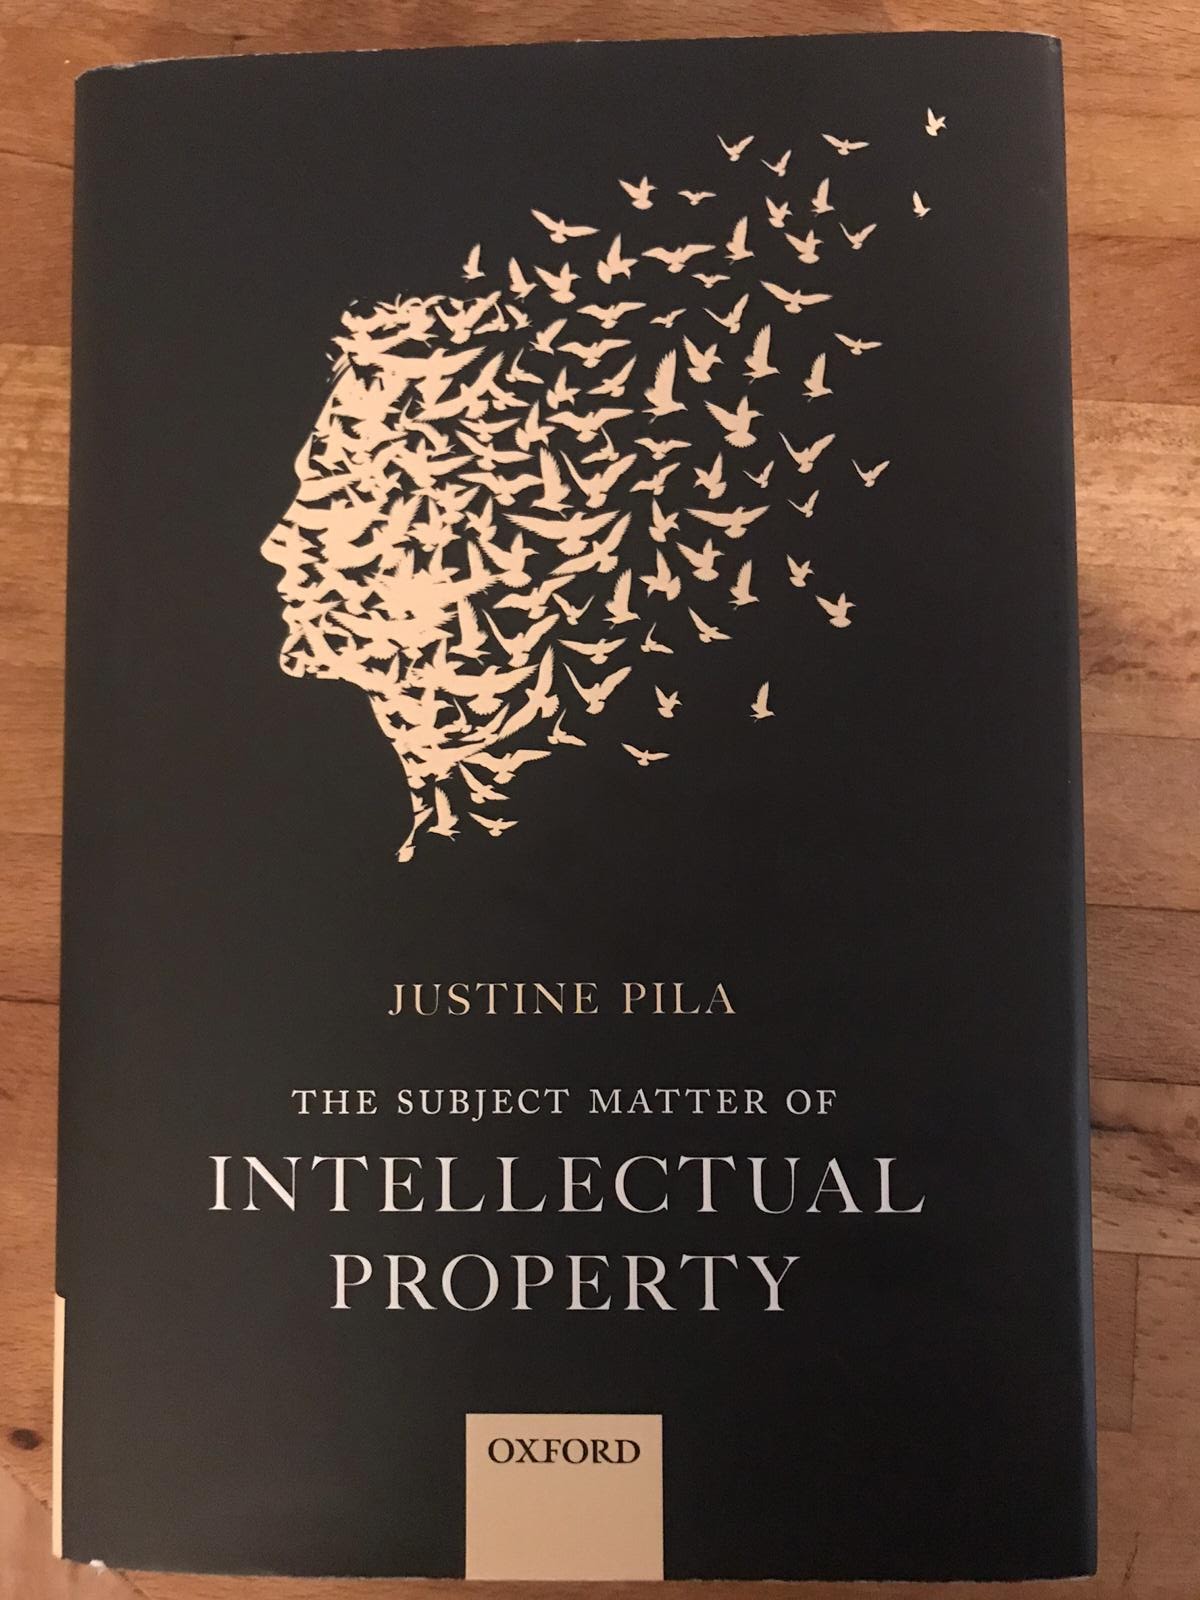 Book Review The Subject Matter of Intellectual Property